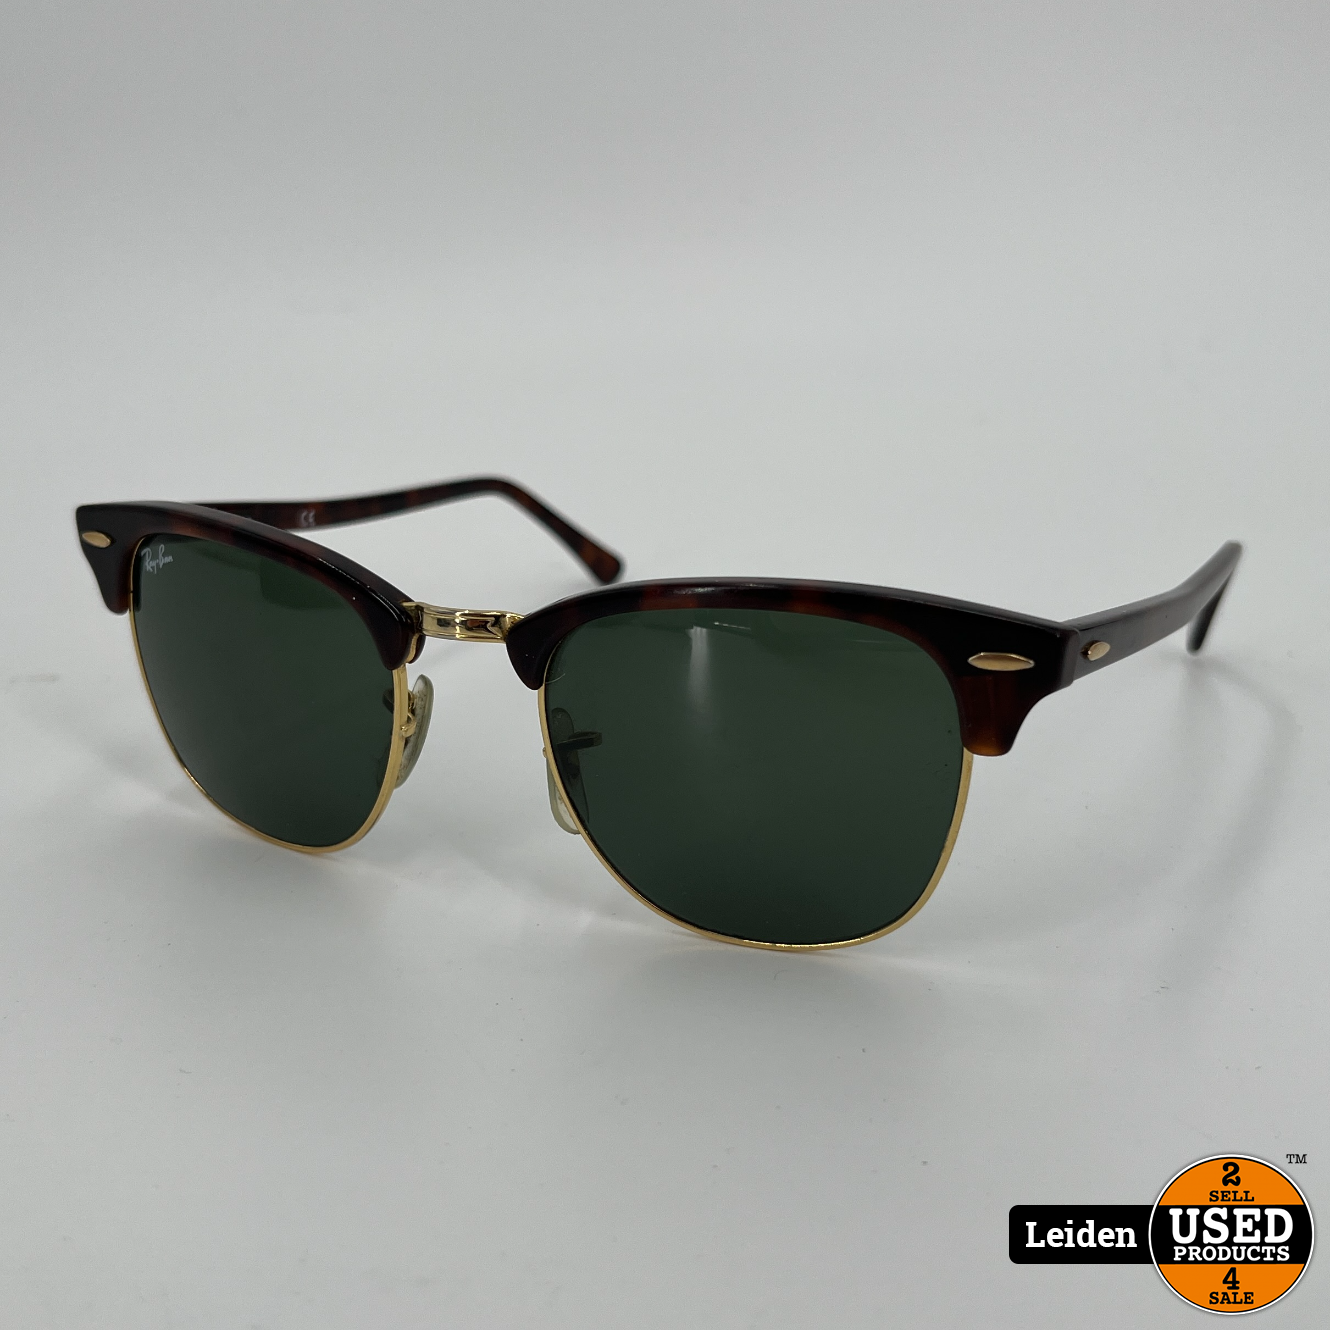 Toelating Dierentuin s nachts Inspiratie Rayban Clubmaster RB3016 Zonnebril - Used Products Leiden